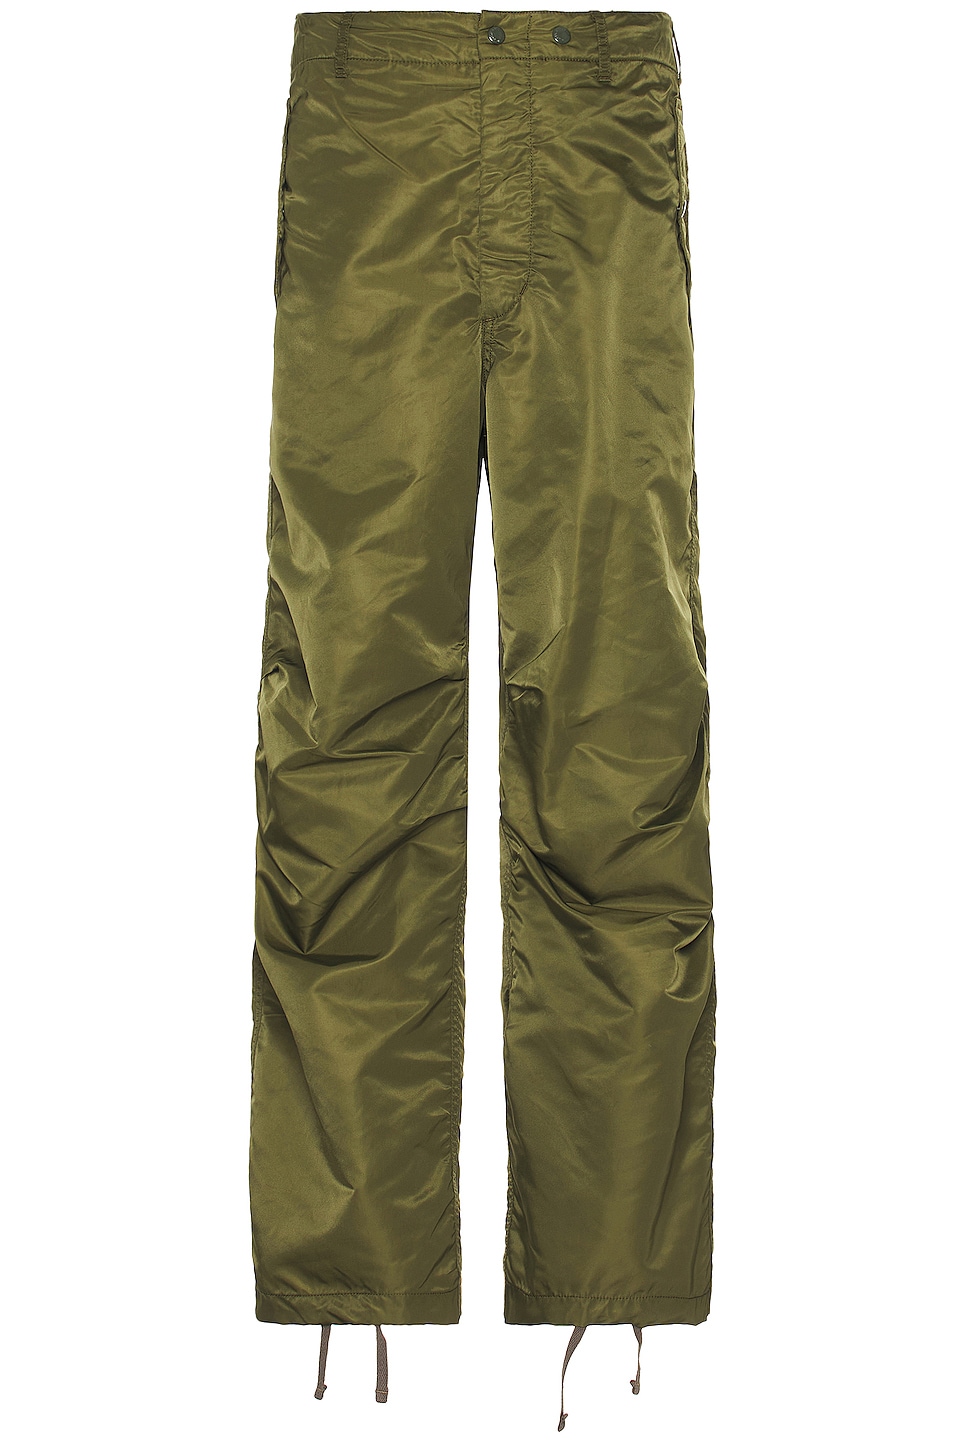 Image 1 of Engineered Garments Over Pant in Olive